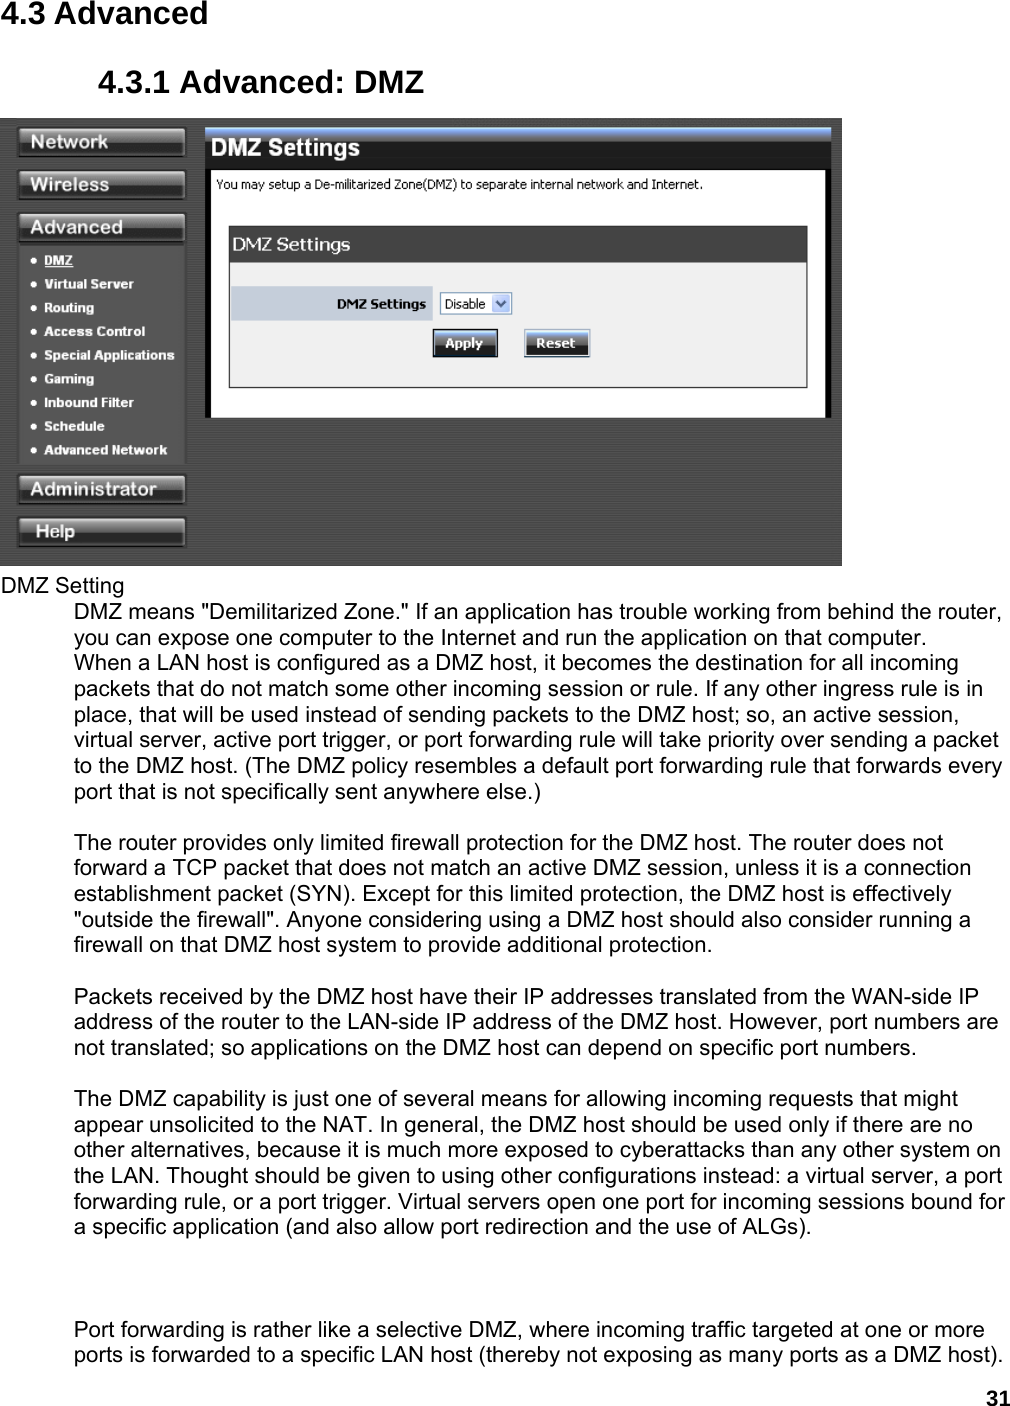 31 4.3 Advanced 4.3.1 Advanced: DMZ  DMZ Setting   DMZ means &quot;Demilitarized Zone.&quot; If an application has trouble working from behind the router, you can expose one computer to the Internet and run the application on that computer.   When a LAN host is configured as a DMZ host, it becomes the destination for all incoming packets that do not match some other incoming session or rule. If any other ingress rule is in place, that will be used instead of sending packets to the DMZ host; so, an active session, virtual server, active port trigger, or port forwarding rule will take priority over sending a packet to the DMZ host. (The DMZ policy resembles a default port forwarding rule that forwards every port that is not specifically sent anywhere else.)    The router provides only limited firewall protection for the DMZ host. The router does not forward a TCP packet that does not match an active DMZ session, unless it is a connection establishment packet (SYN). Except for this limited protection, the DMZ host is effectively &quot;outside the firewall&quot;. Anyone considering using a DMZ host should also consider running a firewall on that DMZ host system to provide additional protection.    Packets received by the DMZ host have their IP addresses translated from the WAN-side IP address of the router to the LAN-side IP address of the DMZ host. However, port numbers are not translated; so applications on the DMZ host can depend on specific port numbers.    The DMZ capability is just one of several means for allowing incoming requests that might appear unsolicited to the NAT. In general, the DMZ host should be used only if there are no other alternatives, because it is much more exposed to cyberattacks than any other system on the LAN. Thought should be given to using other configurations instead: a virtual server, a port forwarding rule, or a port trigger. Virtual servers open one port for incoming sessions bound for a specific application (and also allow port redirection and the use of ALGs).      Port forwarding is rather like a selective DMZ, where incoming traffic targeted at one or more ports is forwarded to a specific LAN host (thereby not exposing as many ports as a DMZ host). 